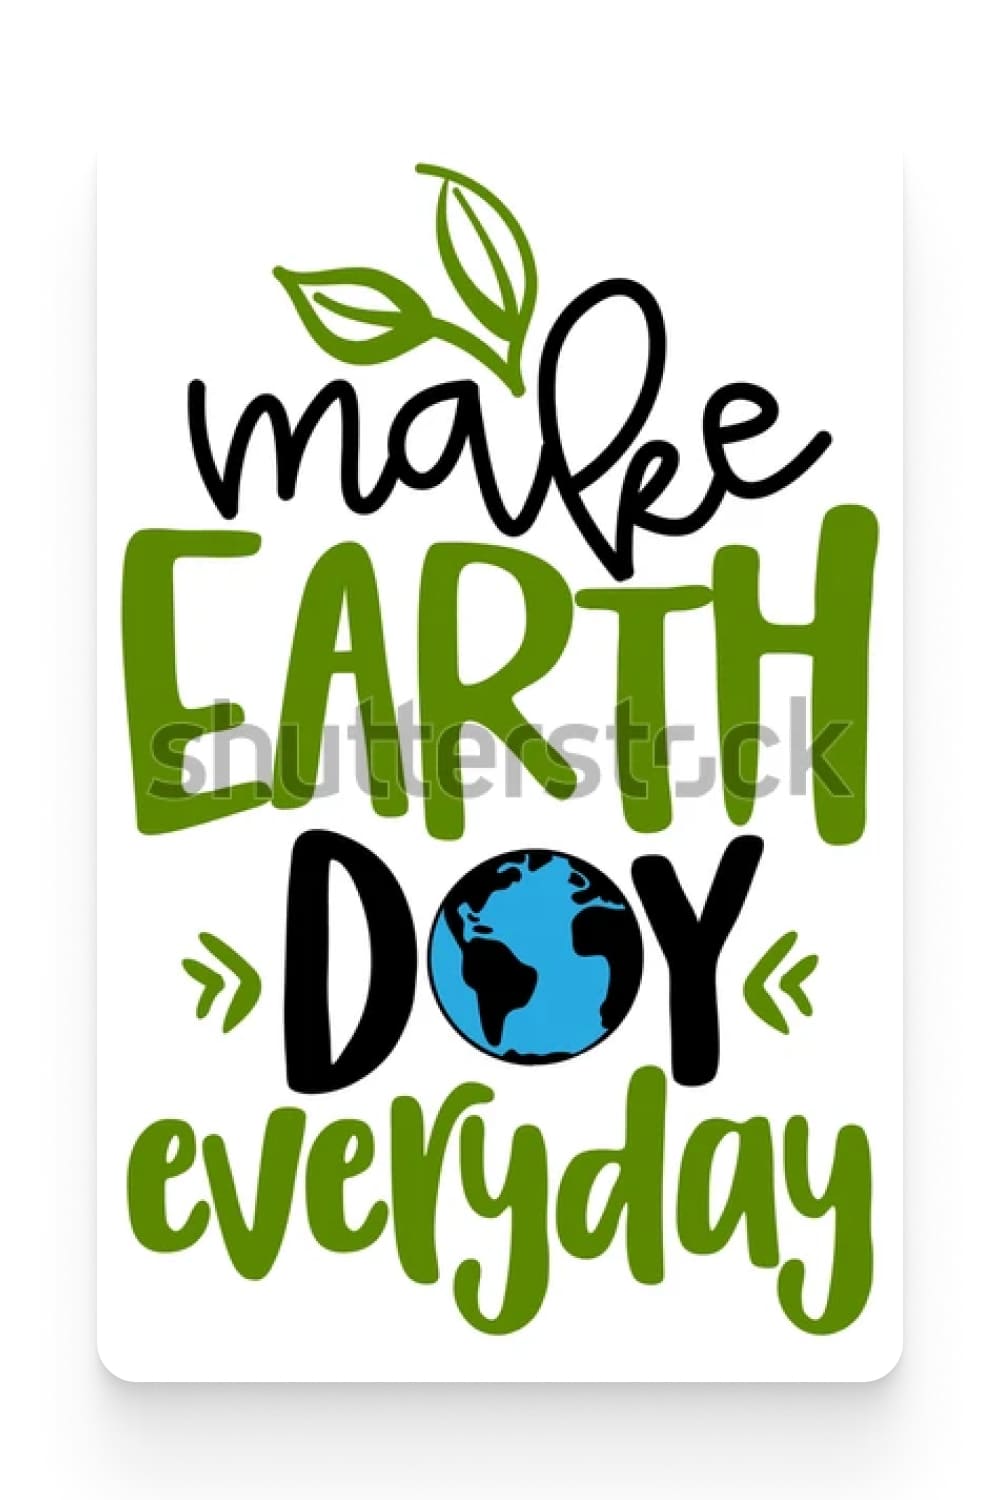 Make Earth Day everyday - text quotes and planet earth drawing with eco friendly quote.